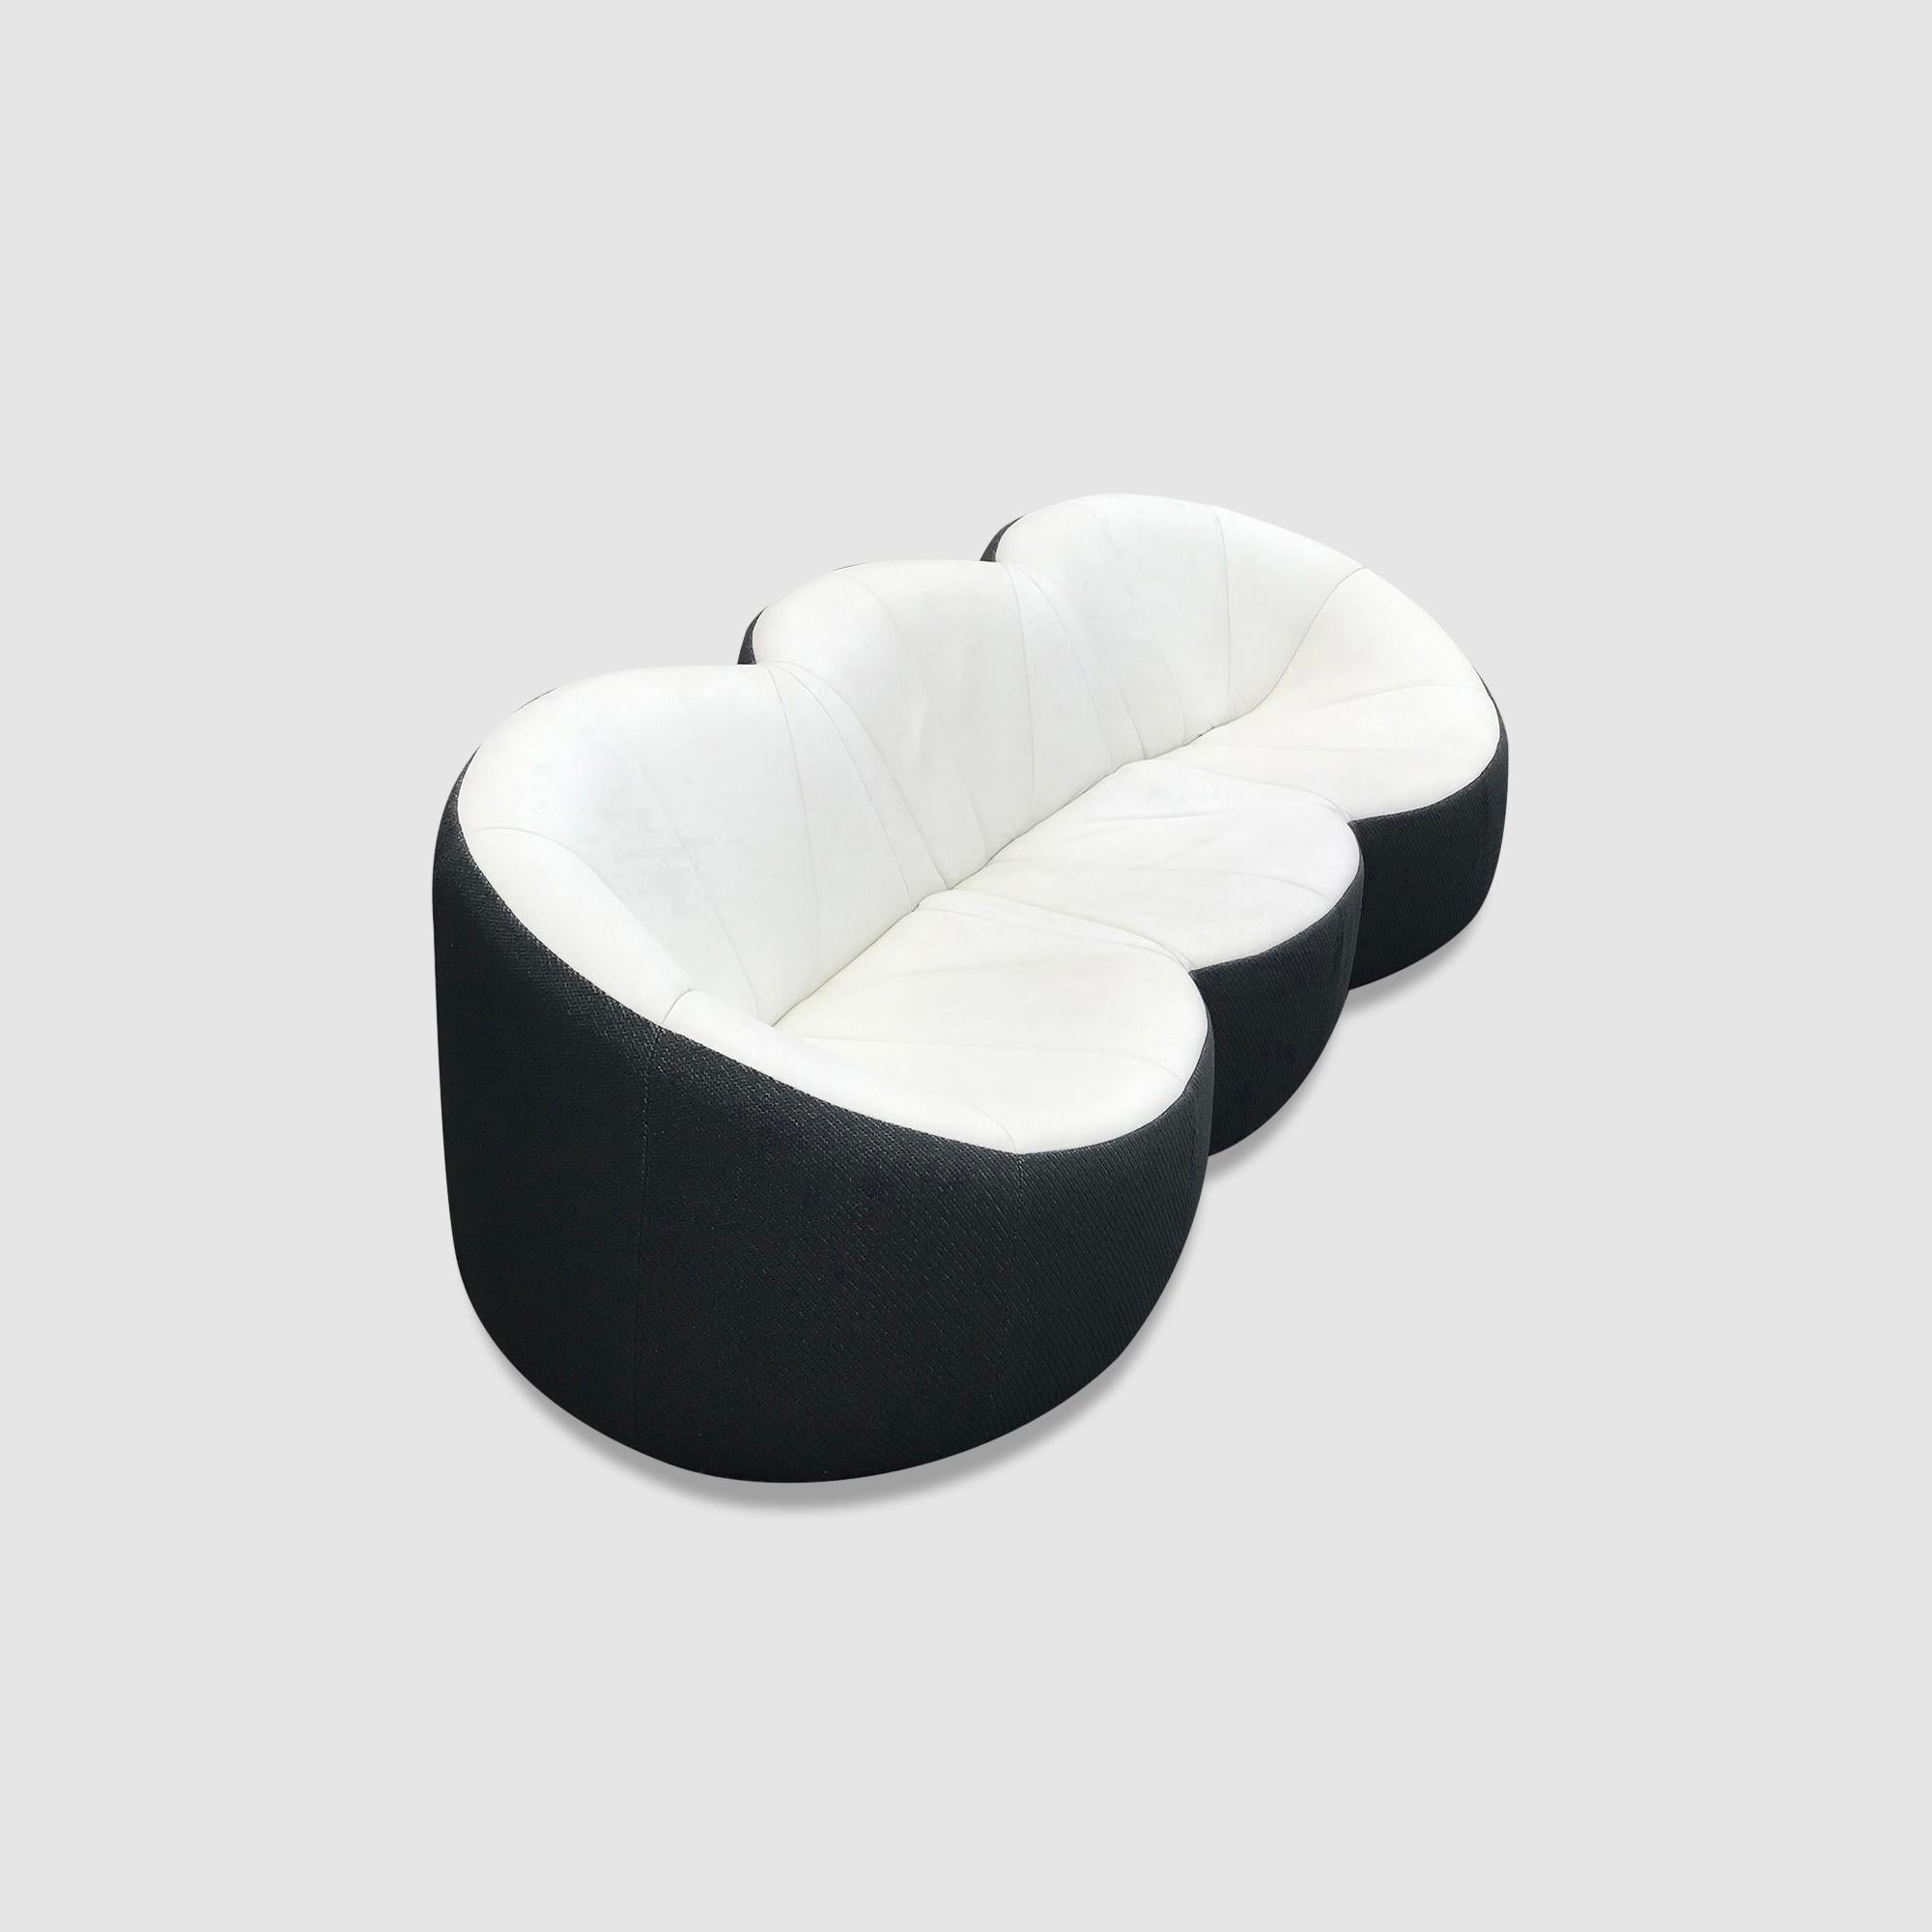 Pumpkin 3-seater sofa by Pierre Paulin for Ligne Roset 2010 For Sale 3